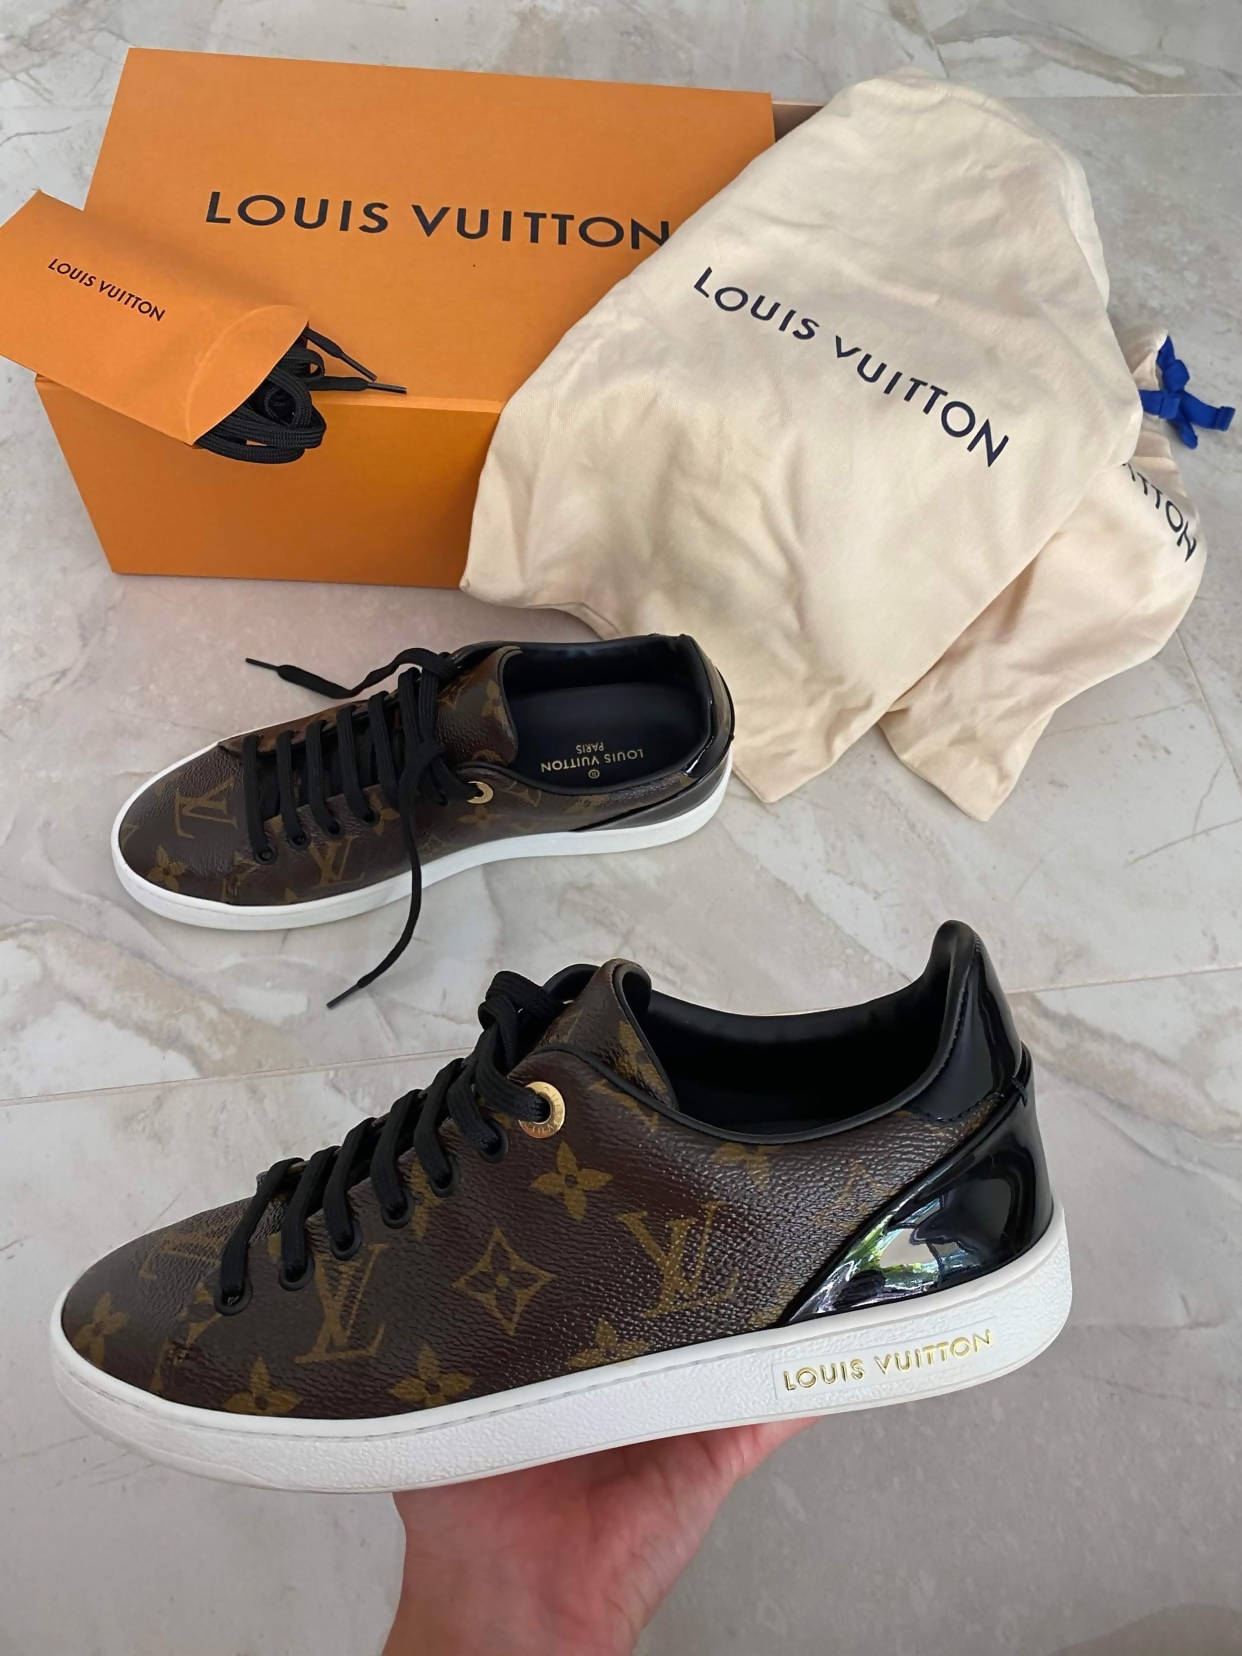 LV FRONTROW Sneakers - Size 37